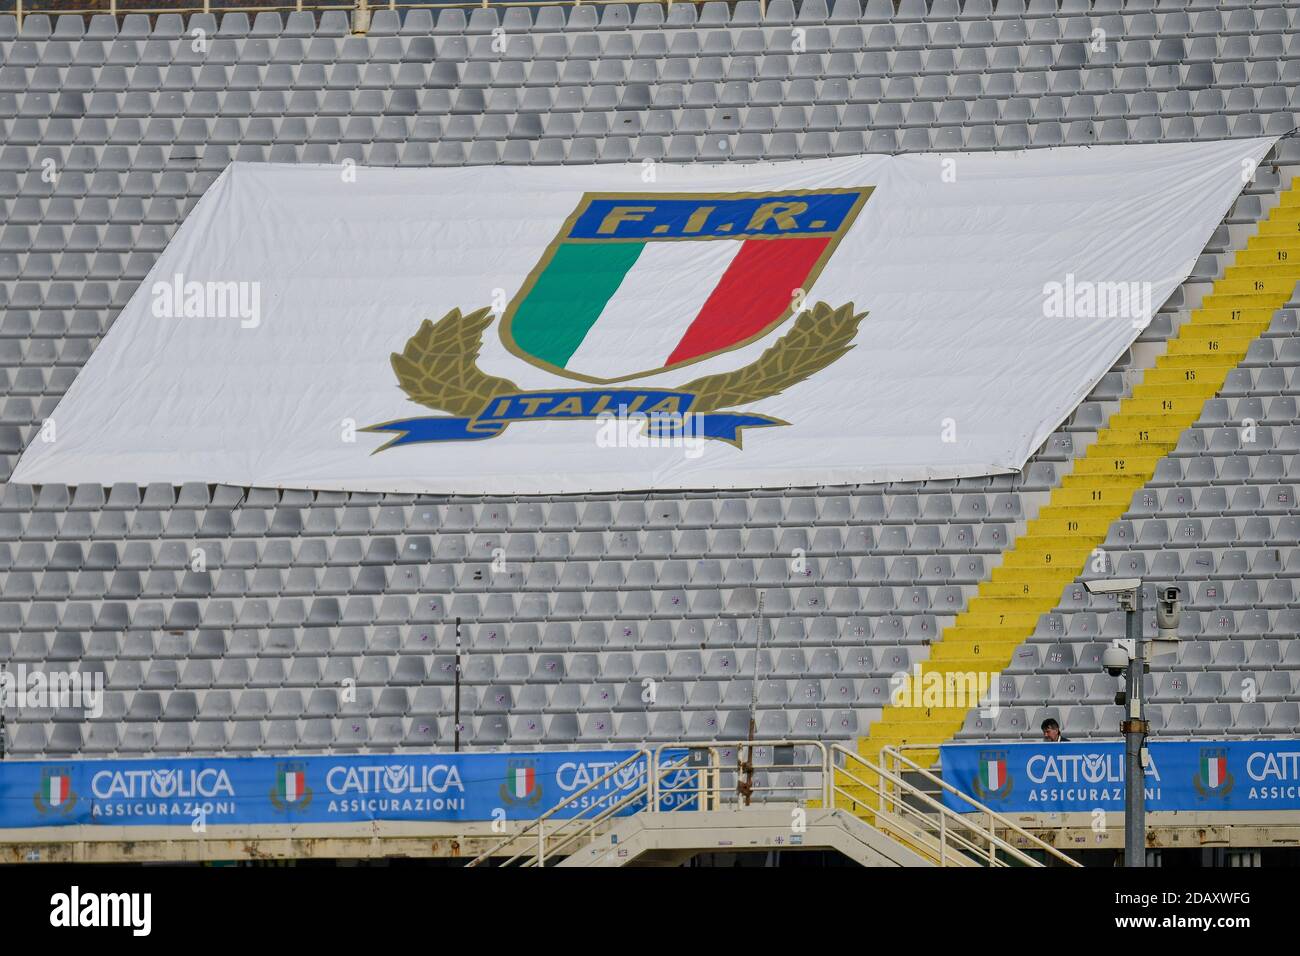 Florence, Italy. 14th Nov, 2020. florence, Italy, Artemio Franchi stadium,  14 Nov 2020, FIR Italian Rugby Federation - Federazione Italiana Rugby sign  logo atmosphere during Cattolica Test Match 2020 - Italy vs